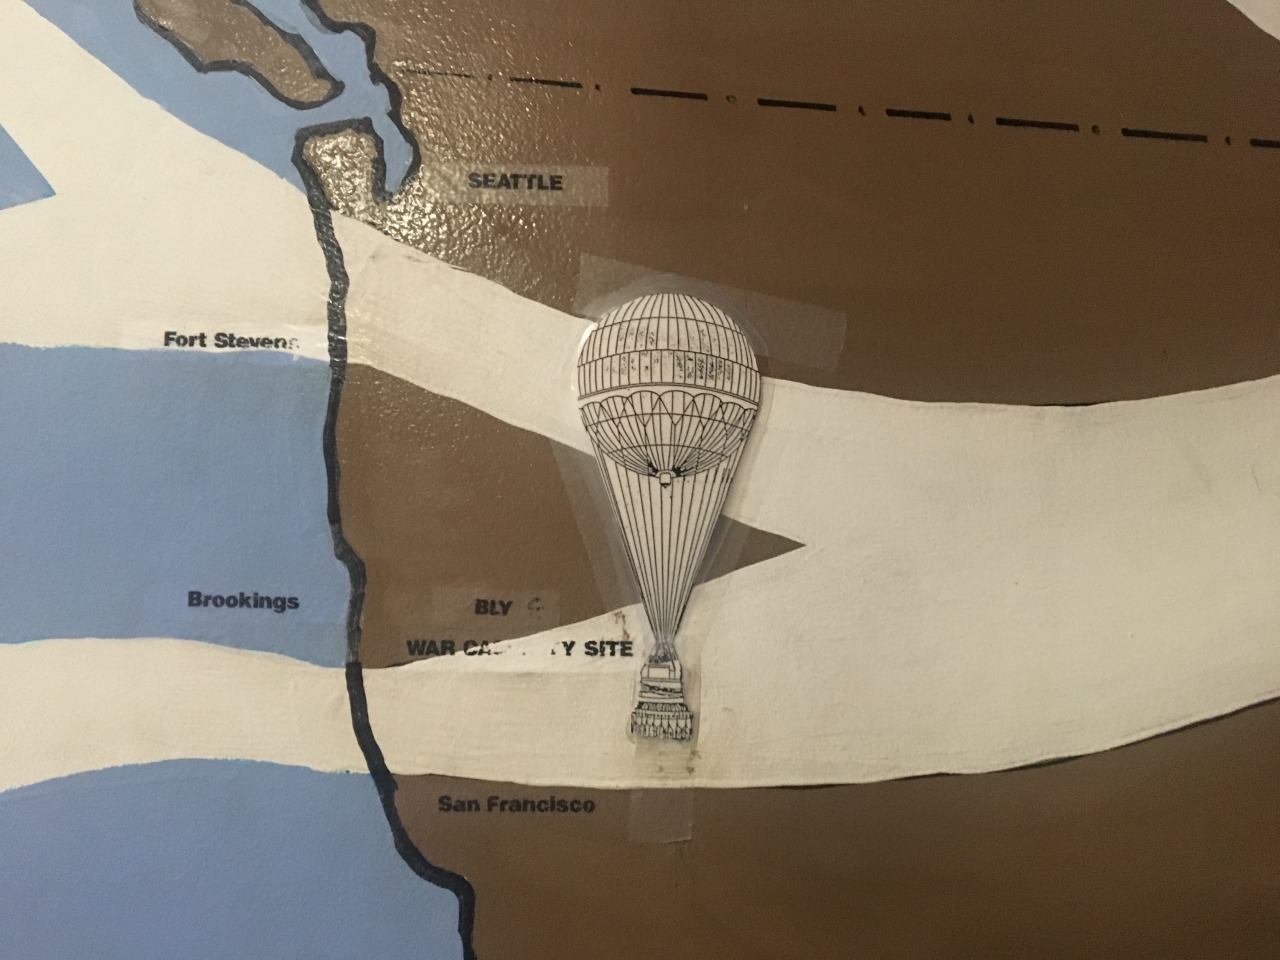 The museum's depiction of an unsuccessful last ditch Japanese proposal to bomb the United States via unmanned hot air balloons.